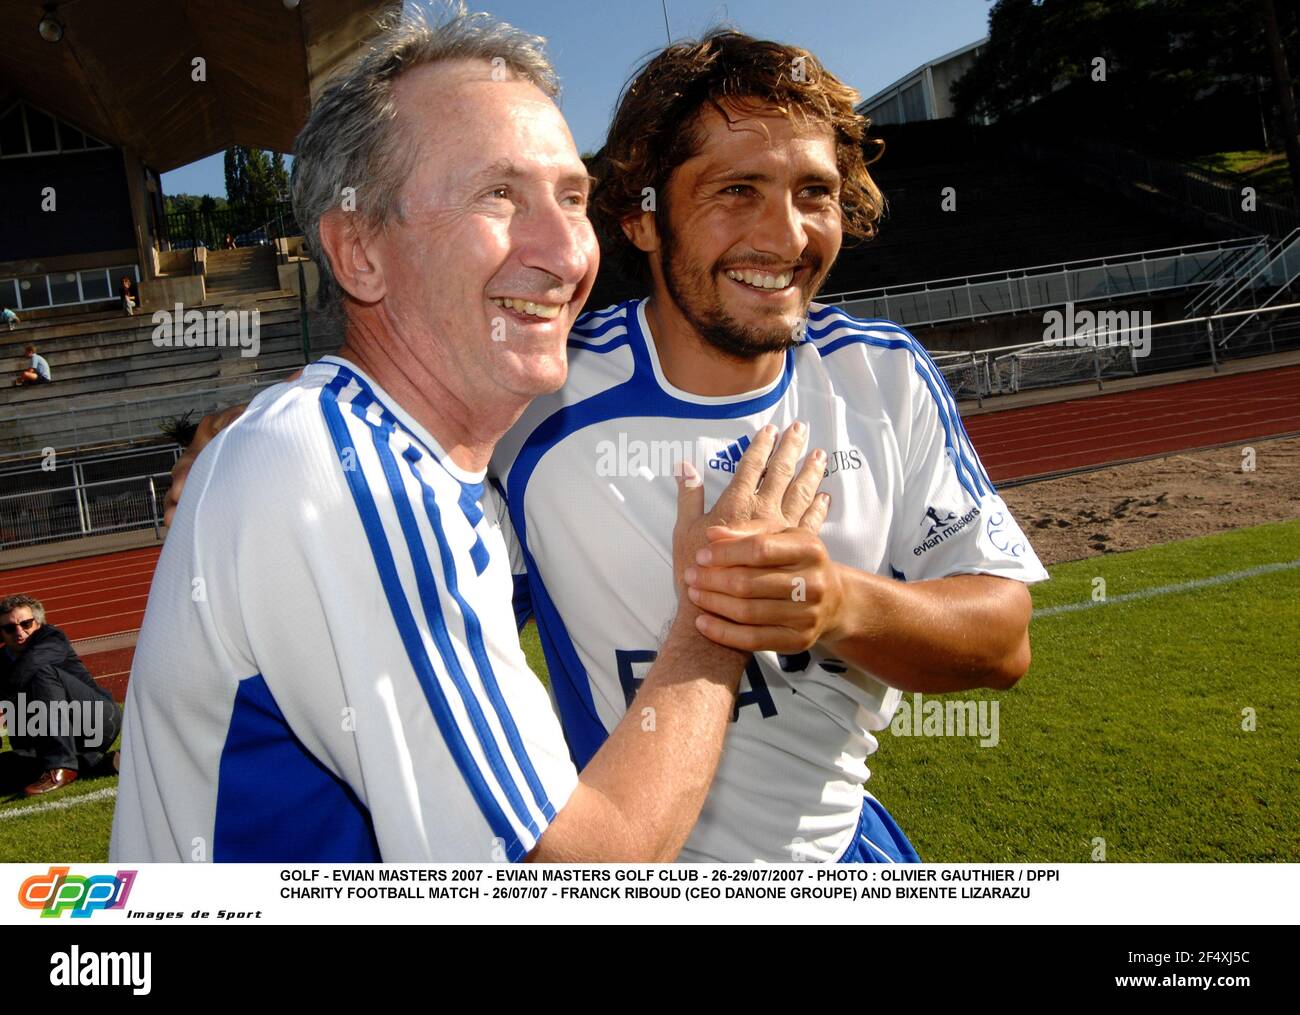 GOLF - EVIAN MASTERS 2007 - EVIAN MASTERS GOLF CLUB - 26-29/07/2007 - PHOTO : OLIVIER GAUTHIER / DPPI CHARITY FOOTBALL MATCH - 26/07/07 - FRANCK RIBOUD (CEO DANONE GROUPE) AND BIXENTE LIZARAZU Stock Photo